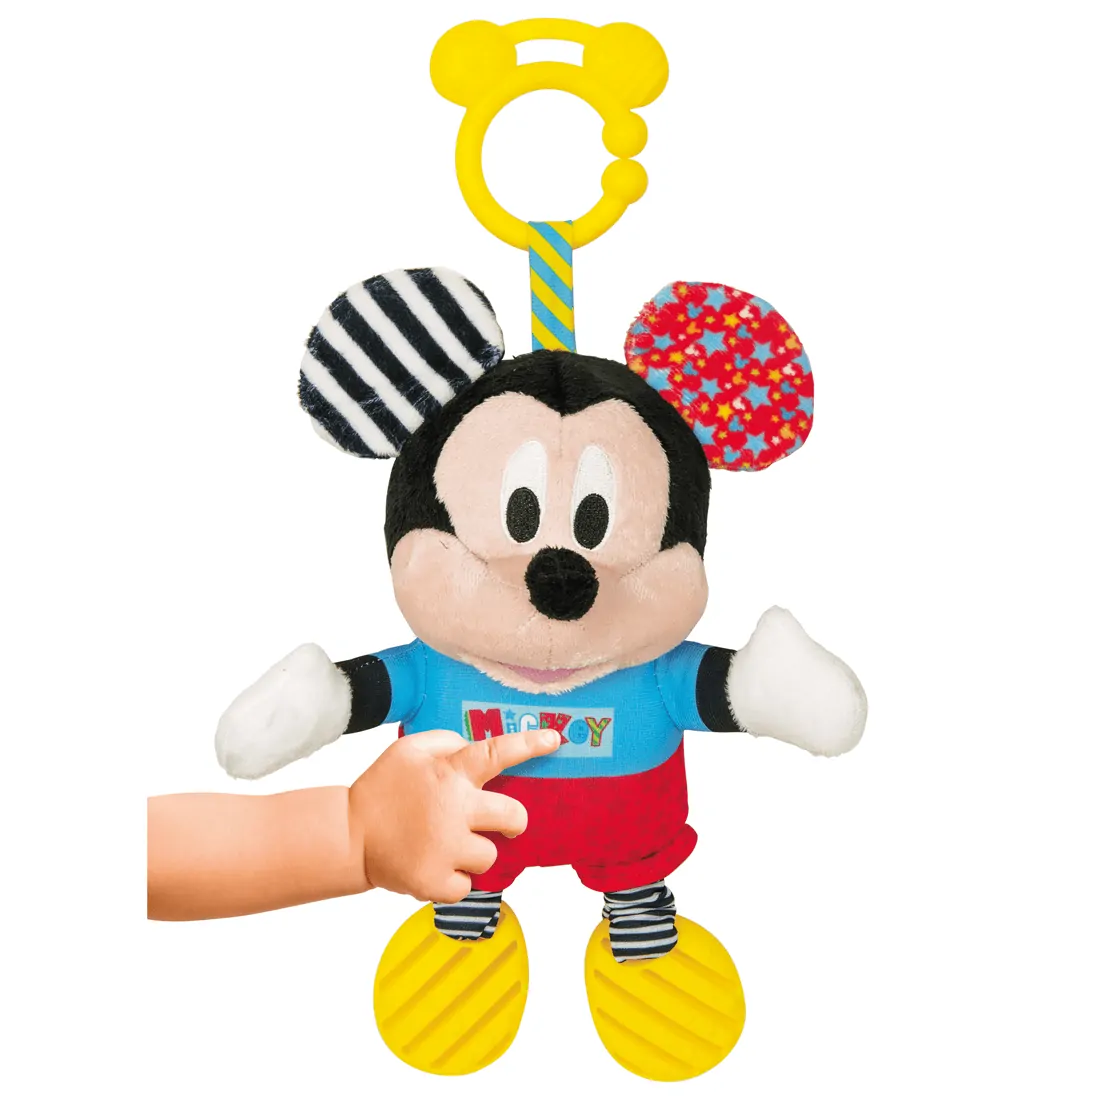 Baby Clementoni Mickey Κουδουνίστρα-Χνουδωτό